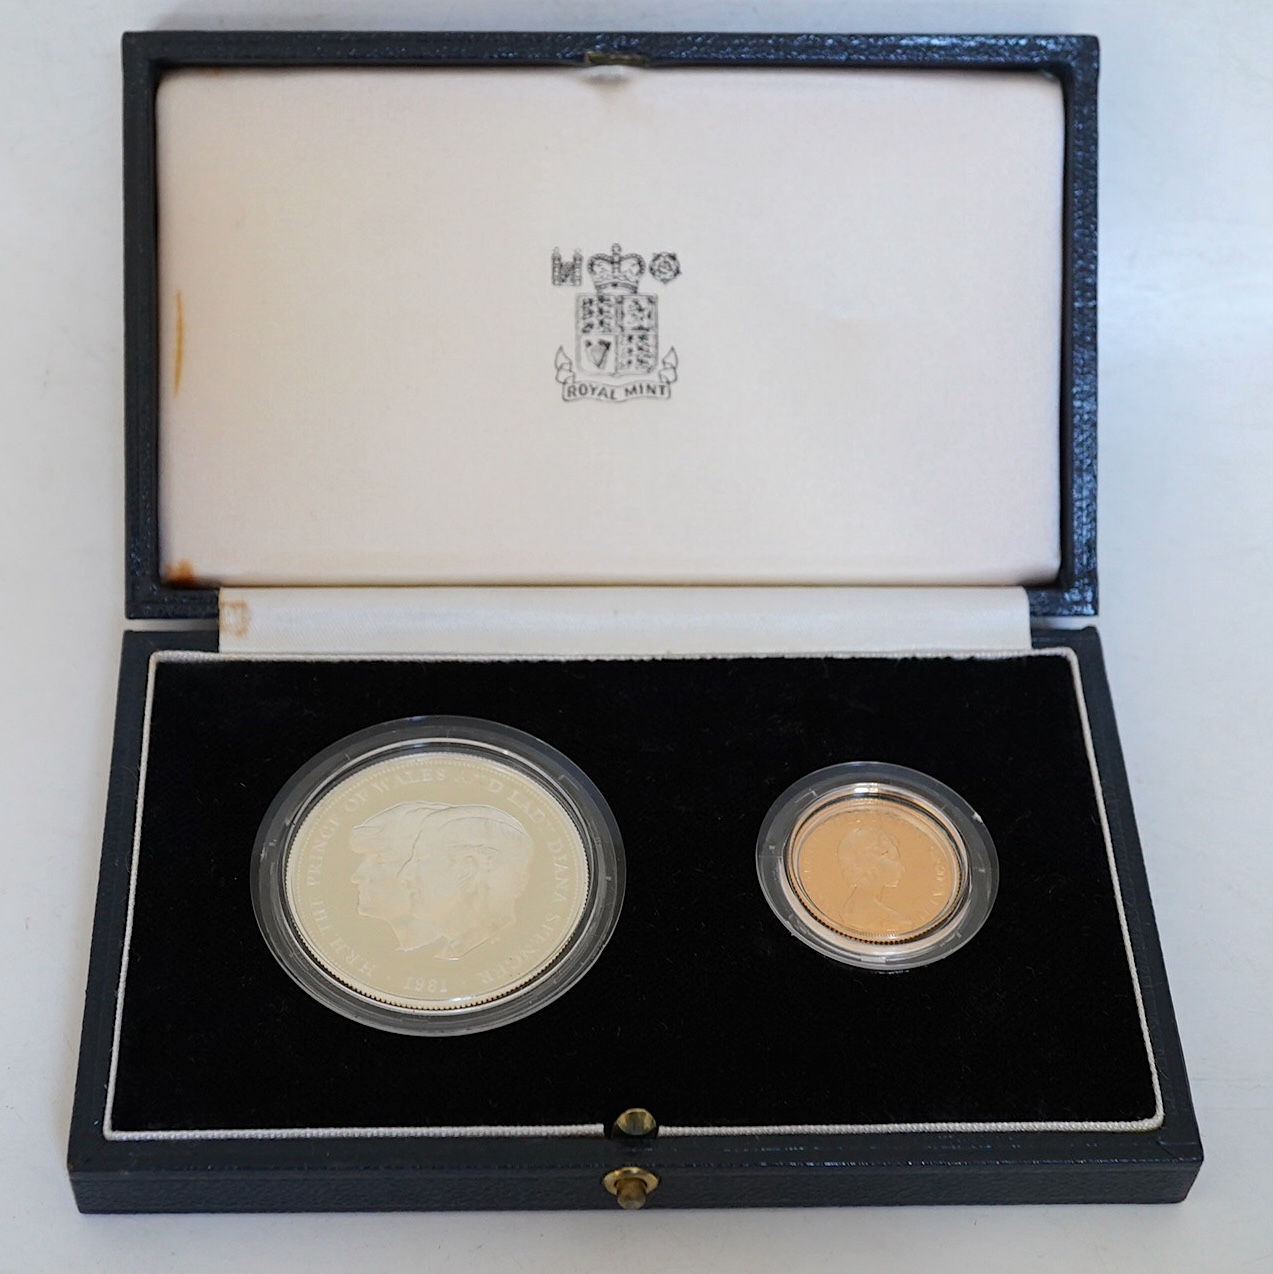 Elizabeth II gold and silver proof coins, Royal Mint UK two coin commemorative set, comprising 1981 proof gold sovereign and Royal Marriage proof silver crown, in case of issue with certificate